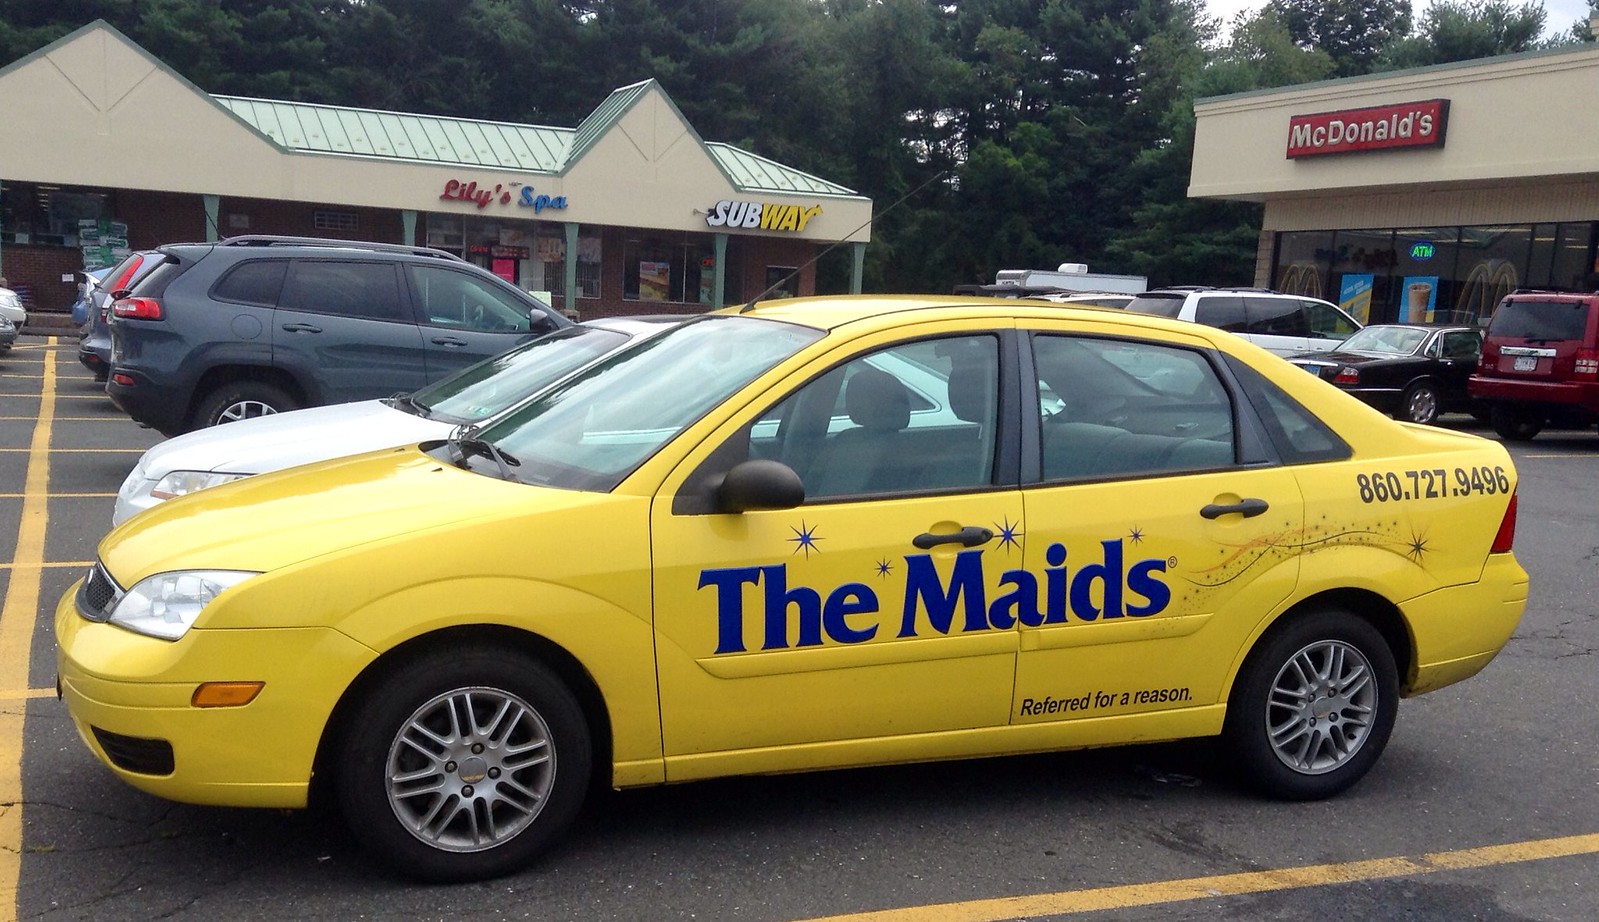 the Maids Maid Service, 7/2014 by Mike Mozart of TheToyC…